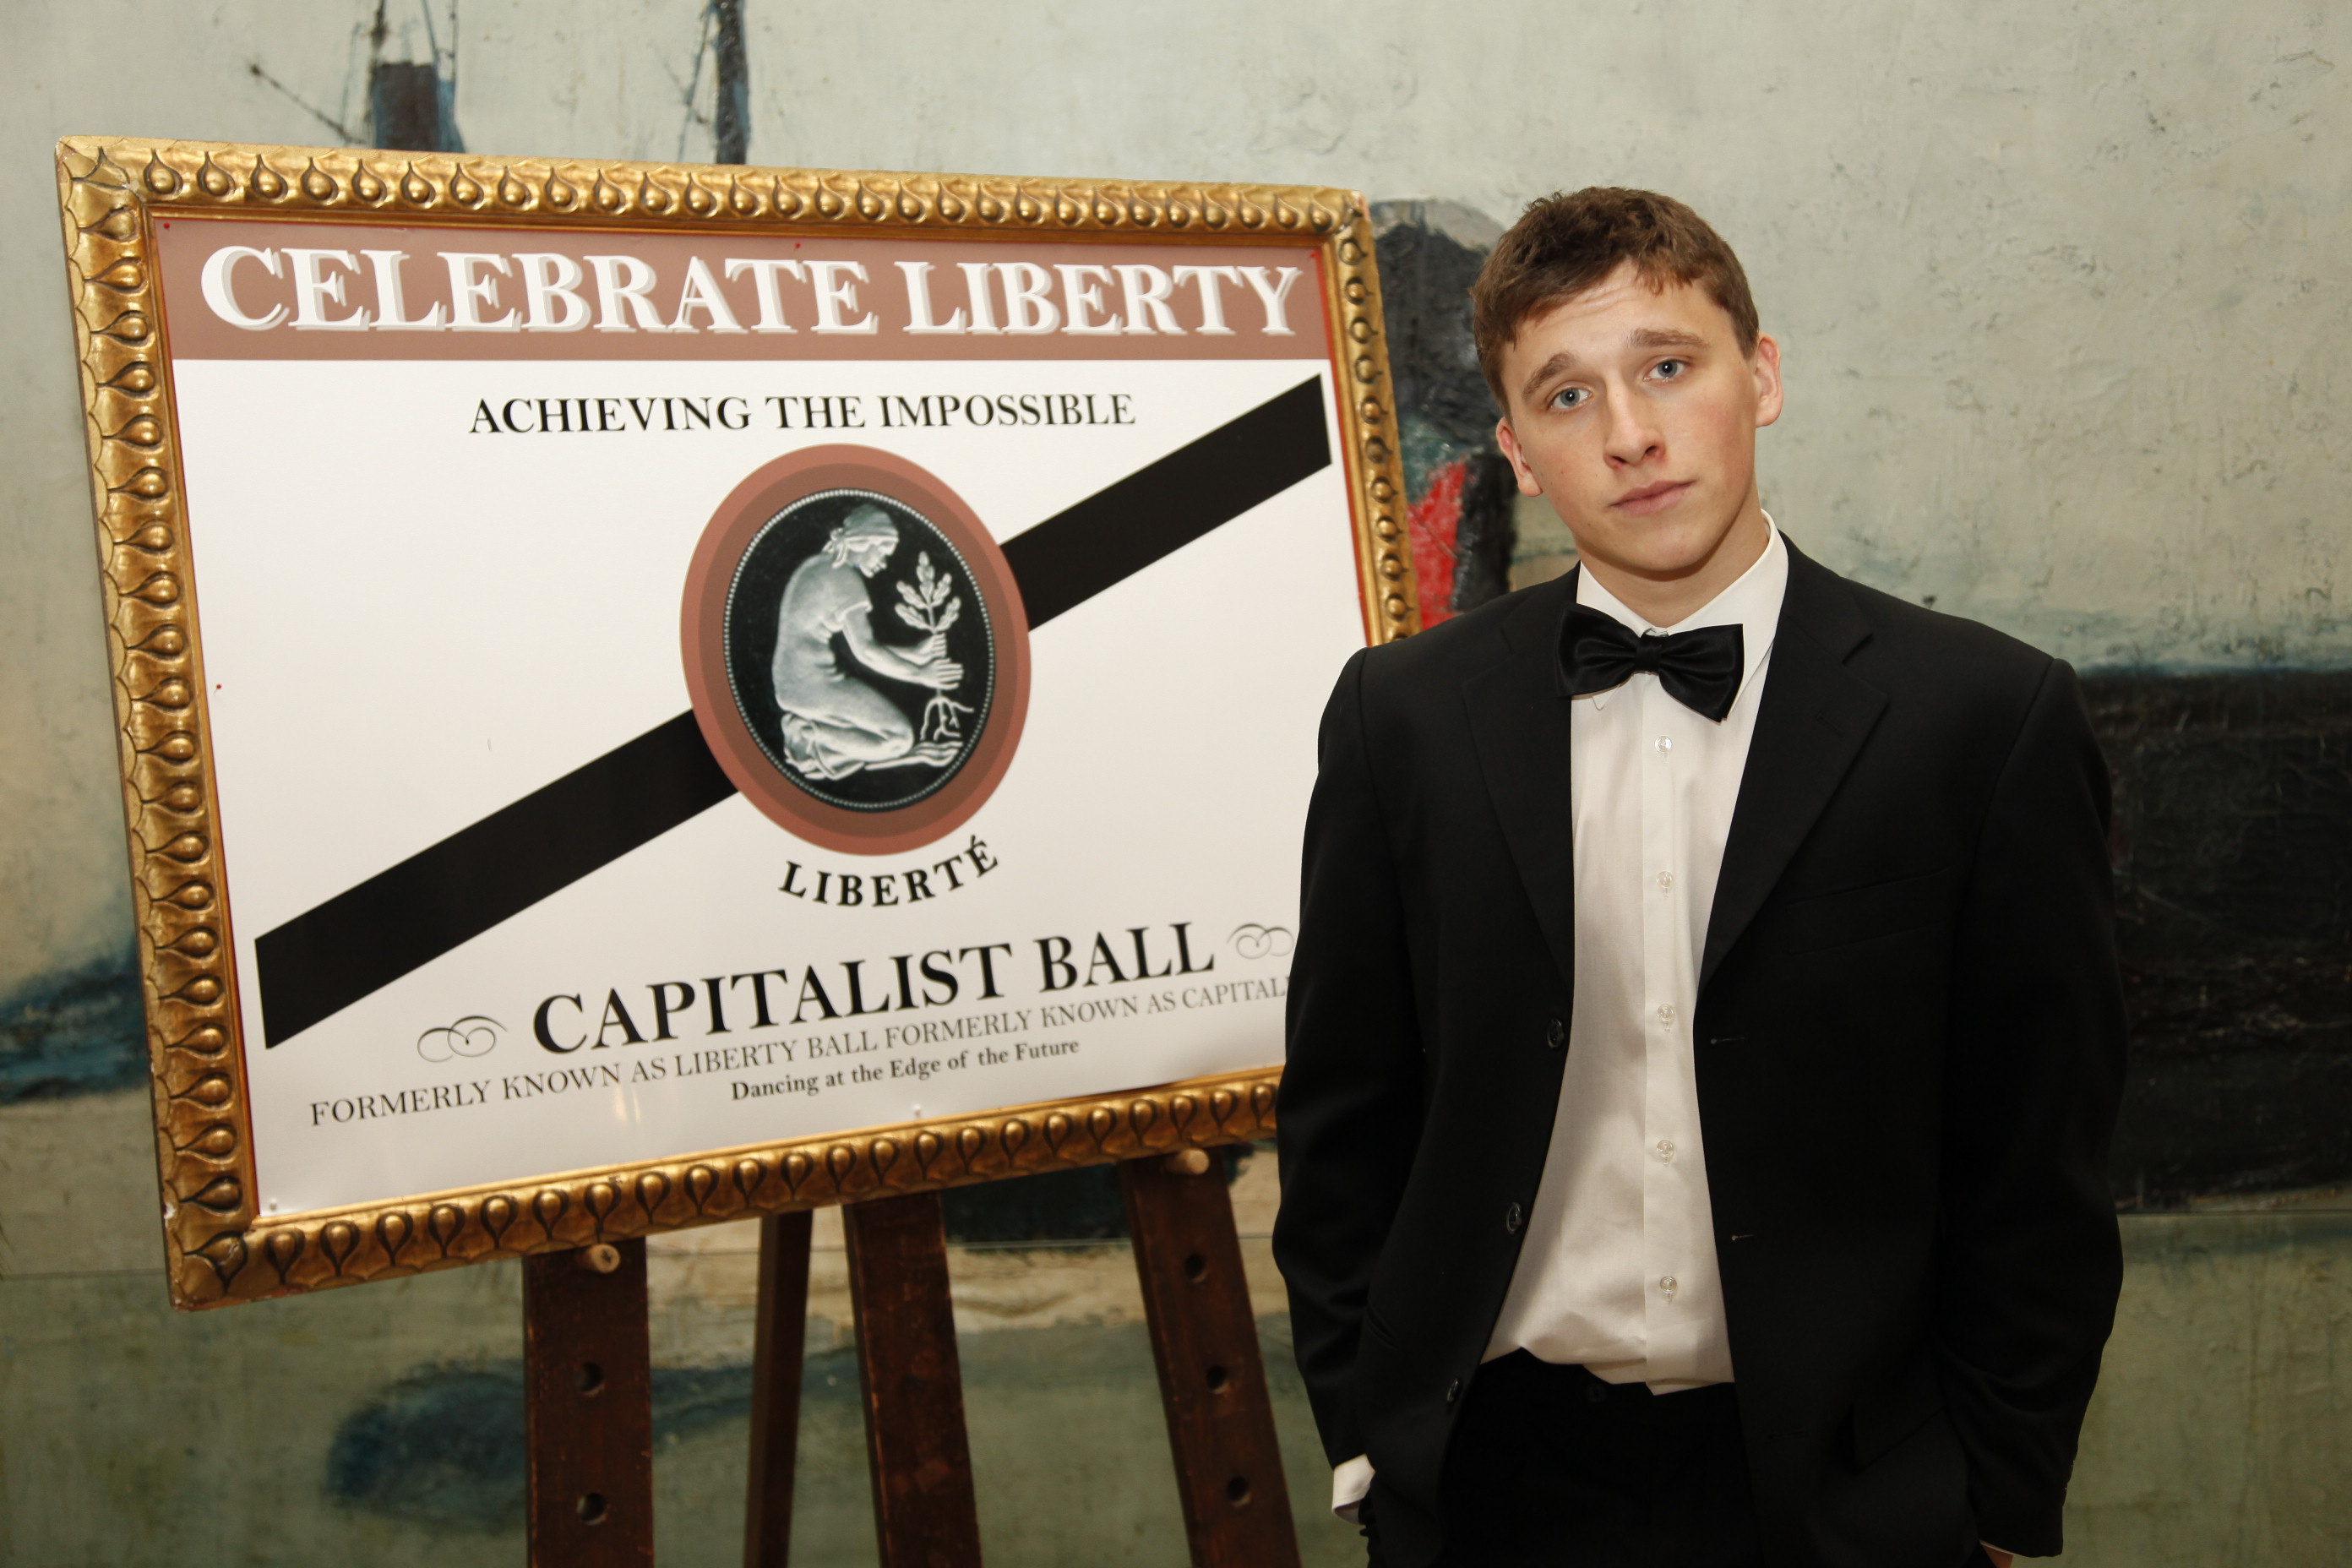  Capitalist Ball formerly known as Liberty Ball formerly known as Capitalist Ball